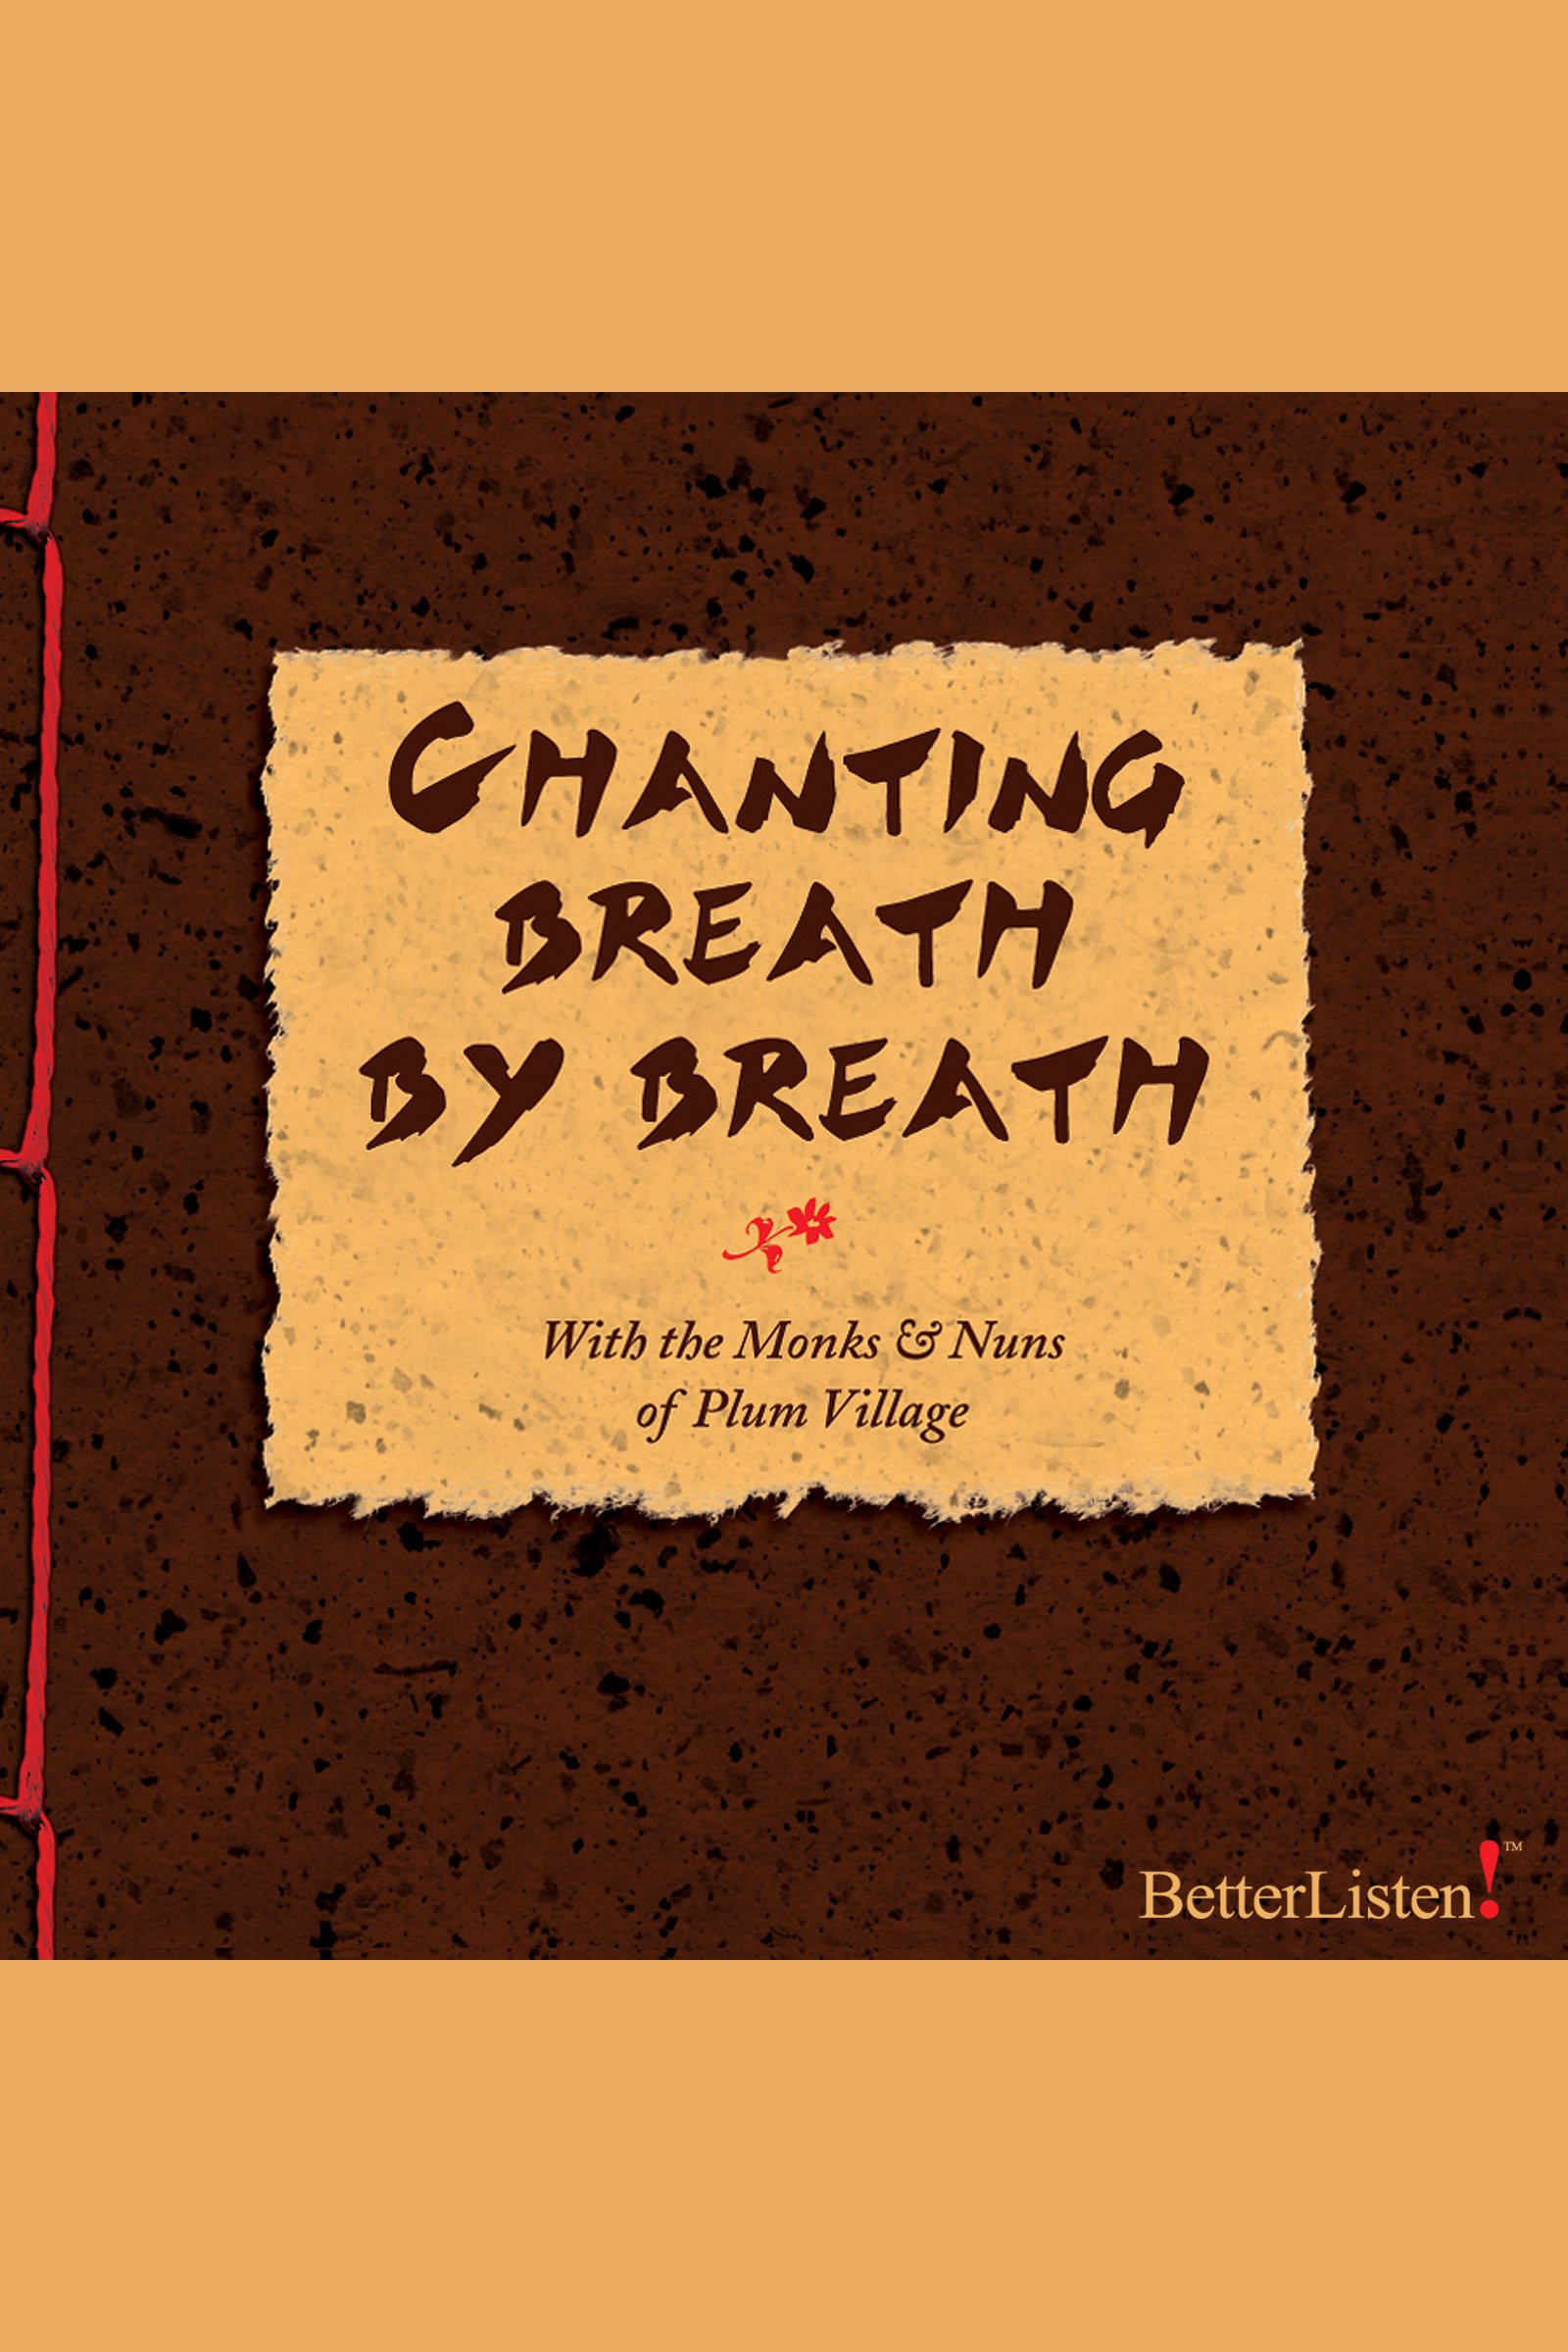 Chanting Breath by Breath with Thich Nhat Hanh and the Monks and Nuns of Plum Village